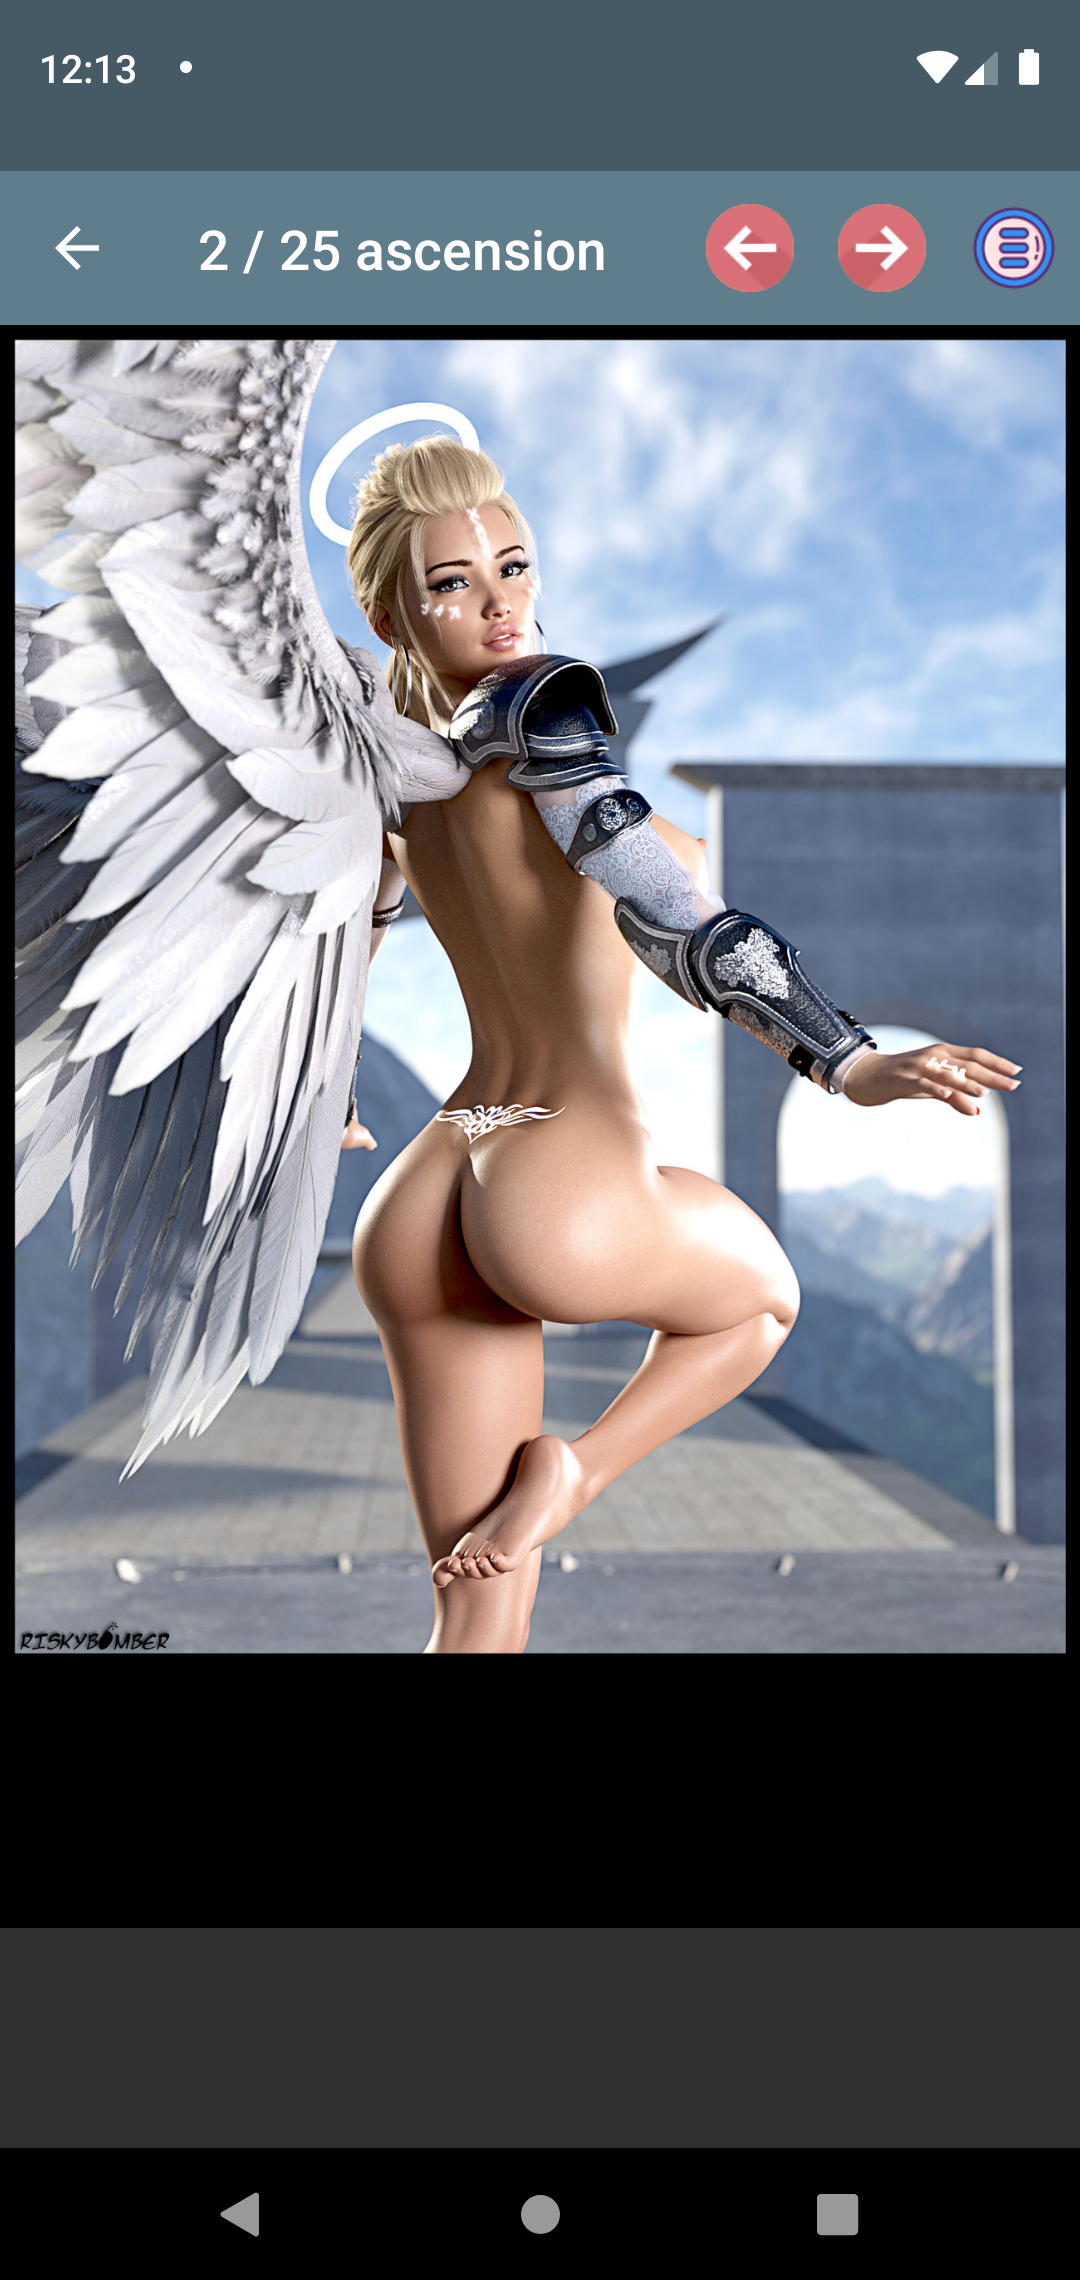 Risky Bomber Pictures apps,download,andriod,porn,pic,sexy,hentei,toys,hot,anal,art,images,video,android,mature,photo,hentai,adult,app,erotic,photos,apk,pics,pornstar,tattoo